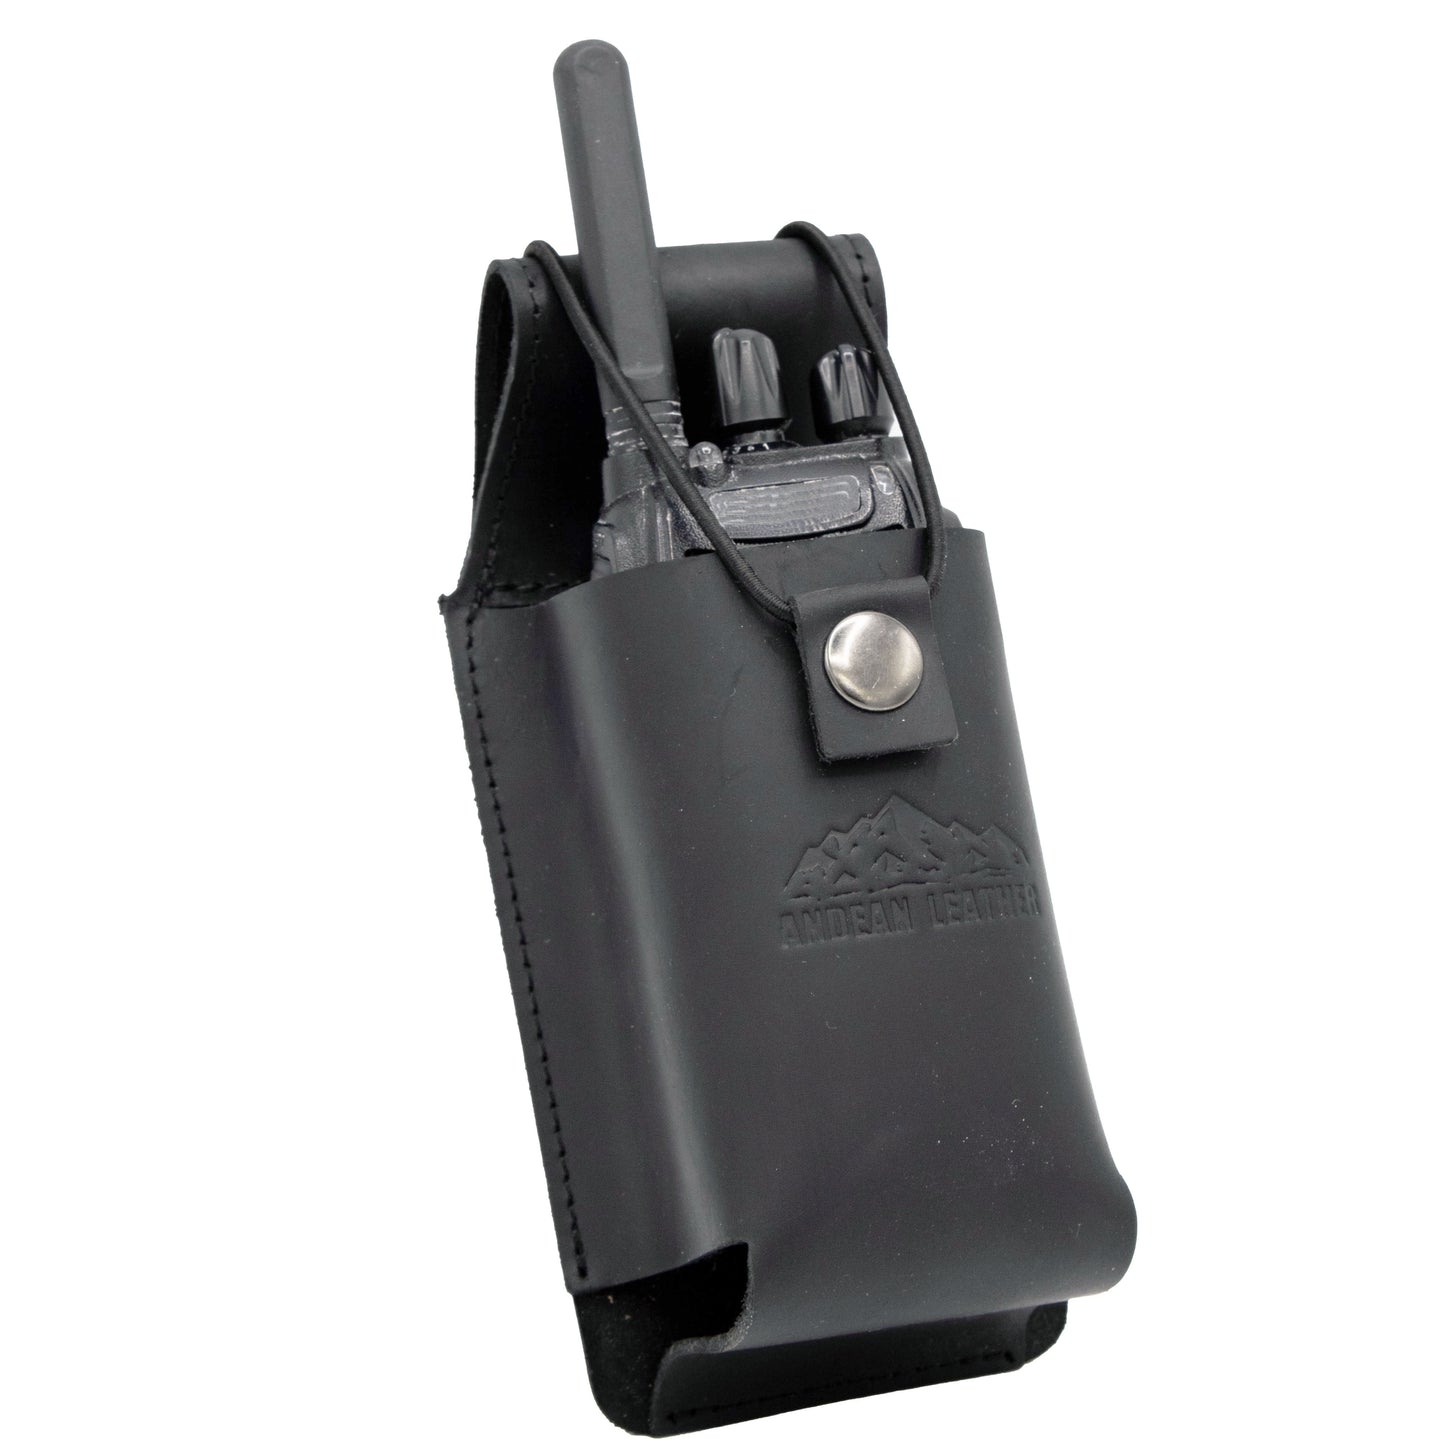 Andean Leather Two Way Radio Holder